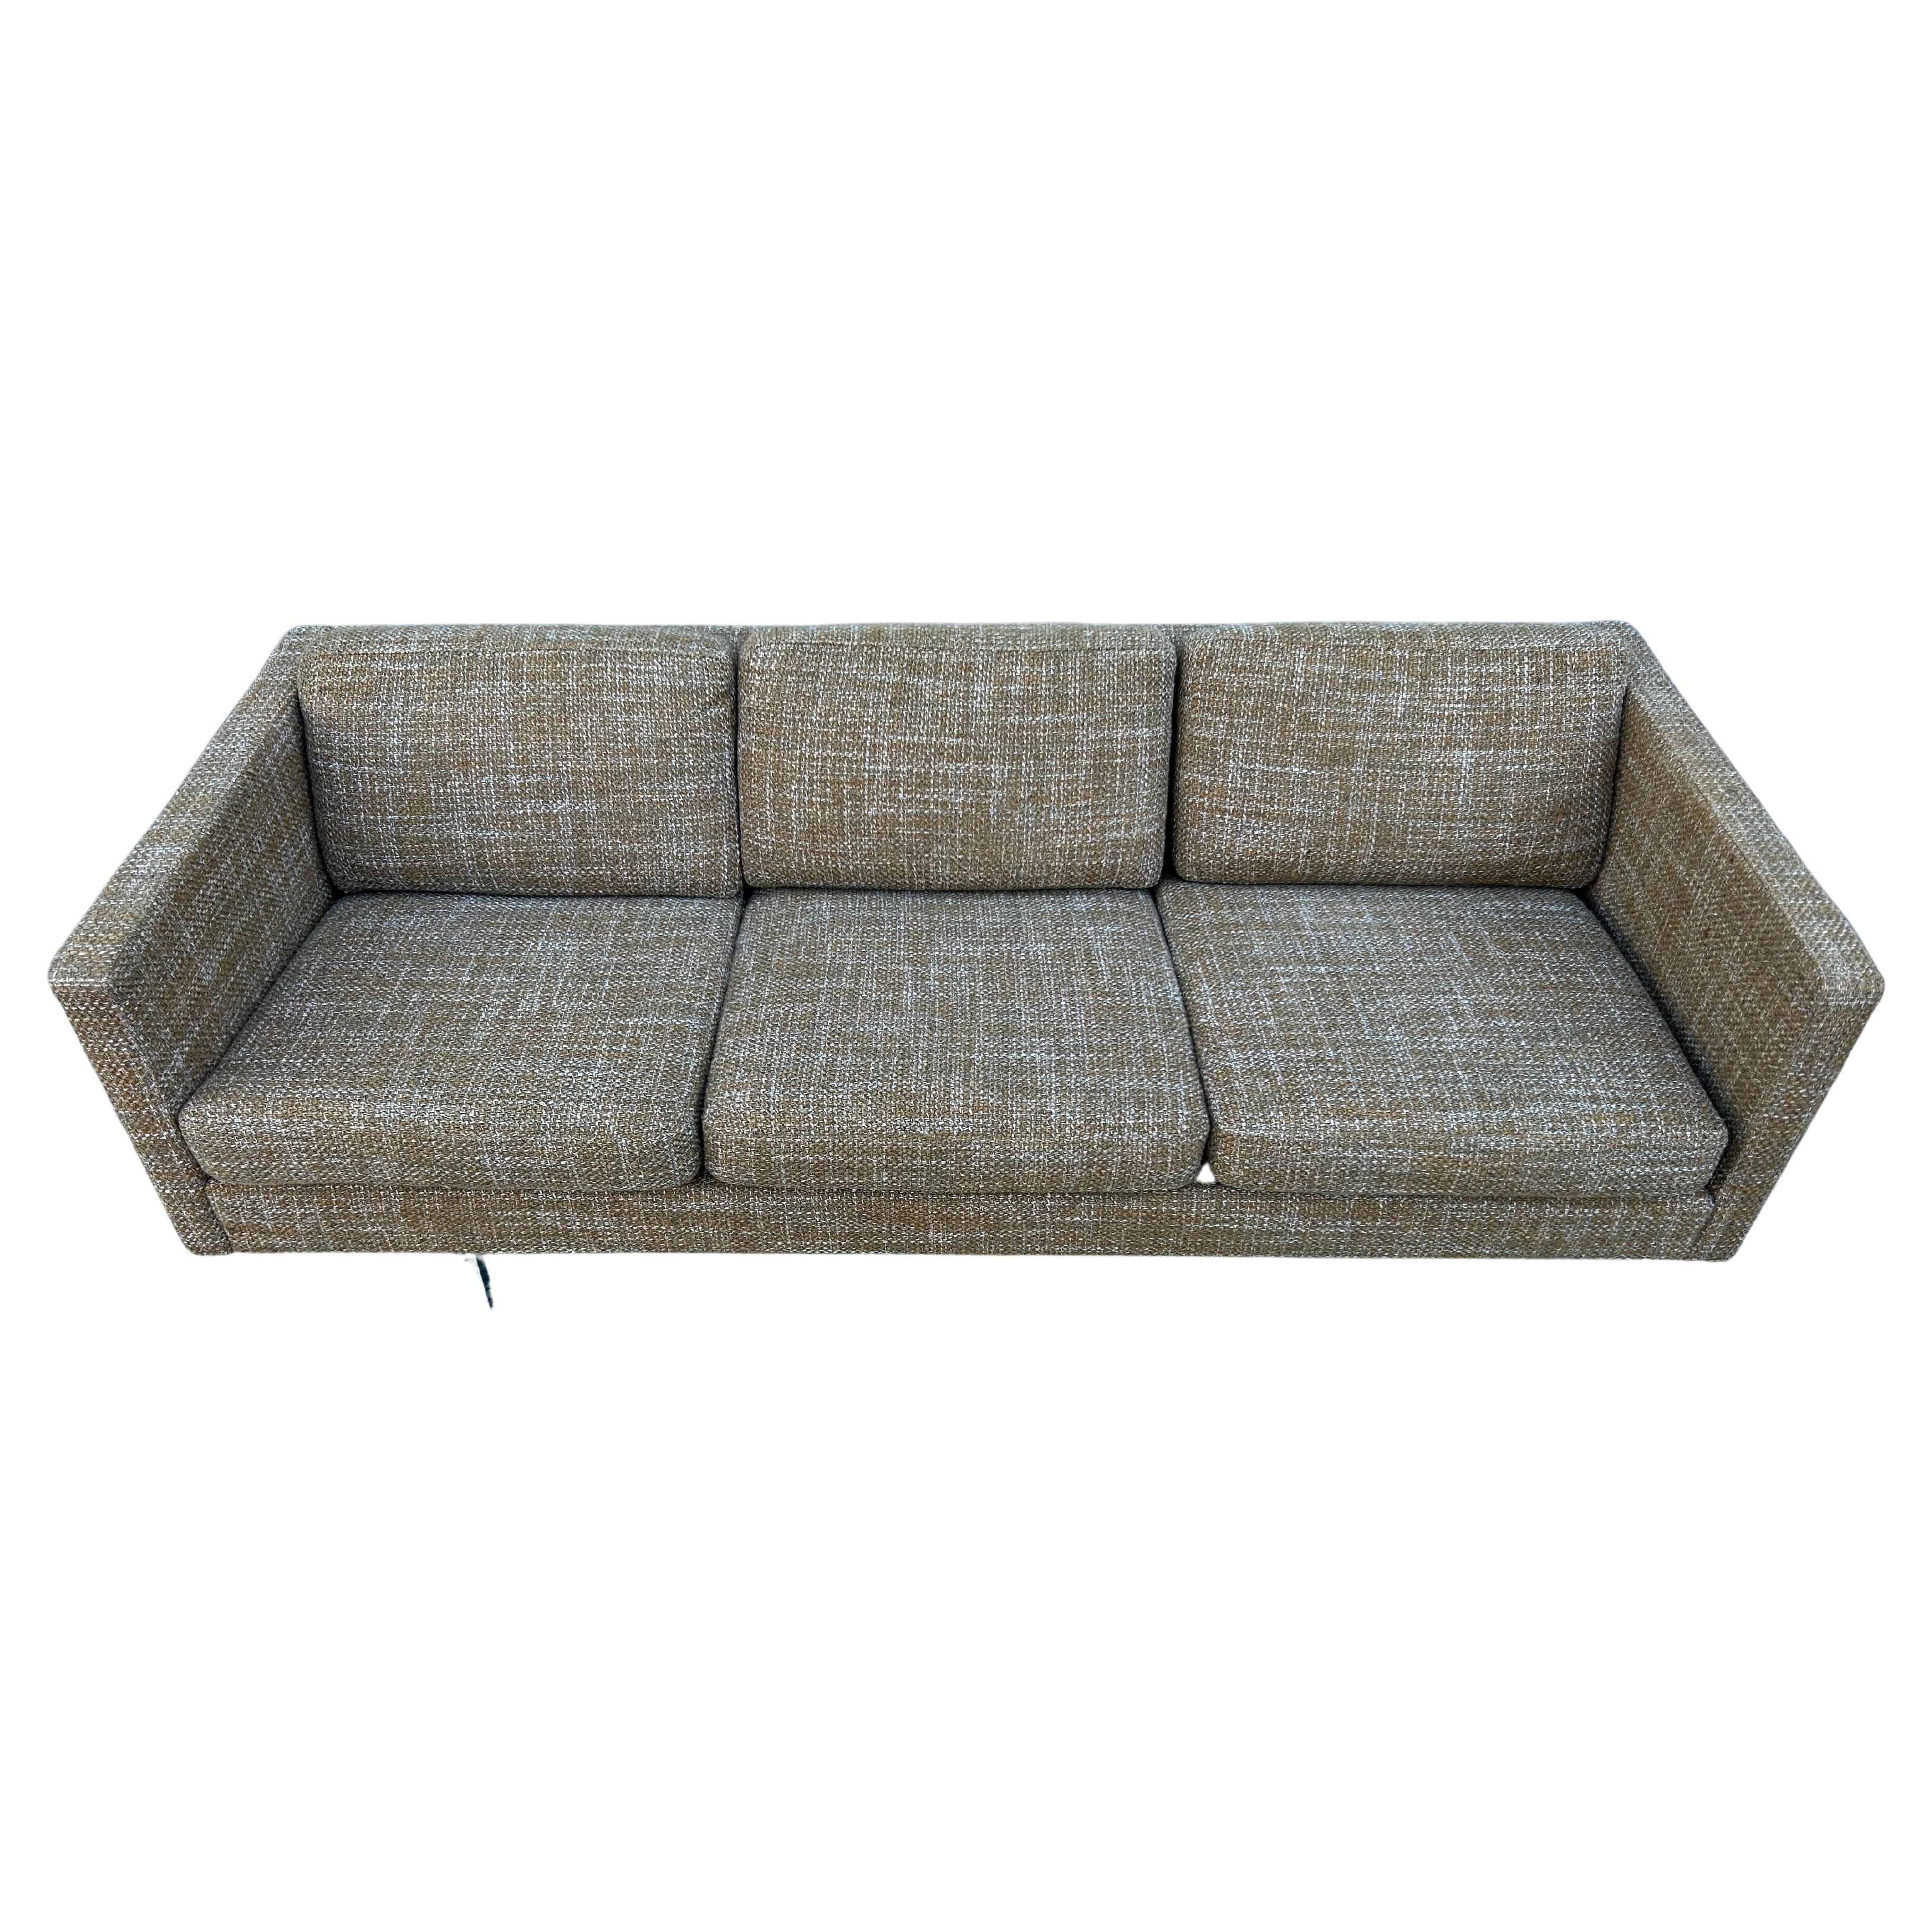 Mid-Century Danish Modern Cube 3 Seat Sofa in Brown Woven Upholstery For Sale 1